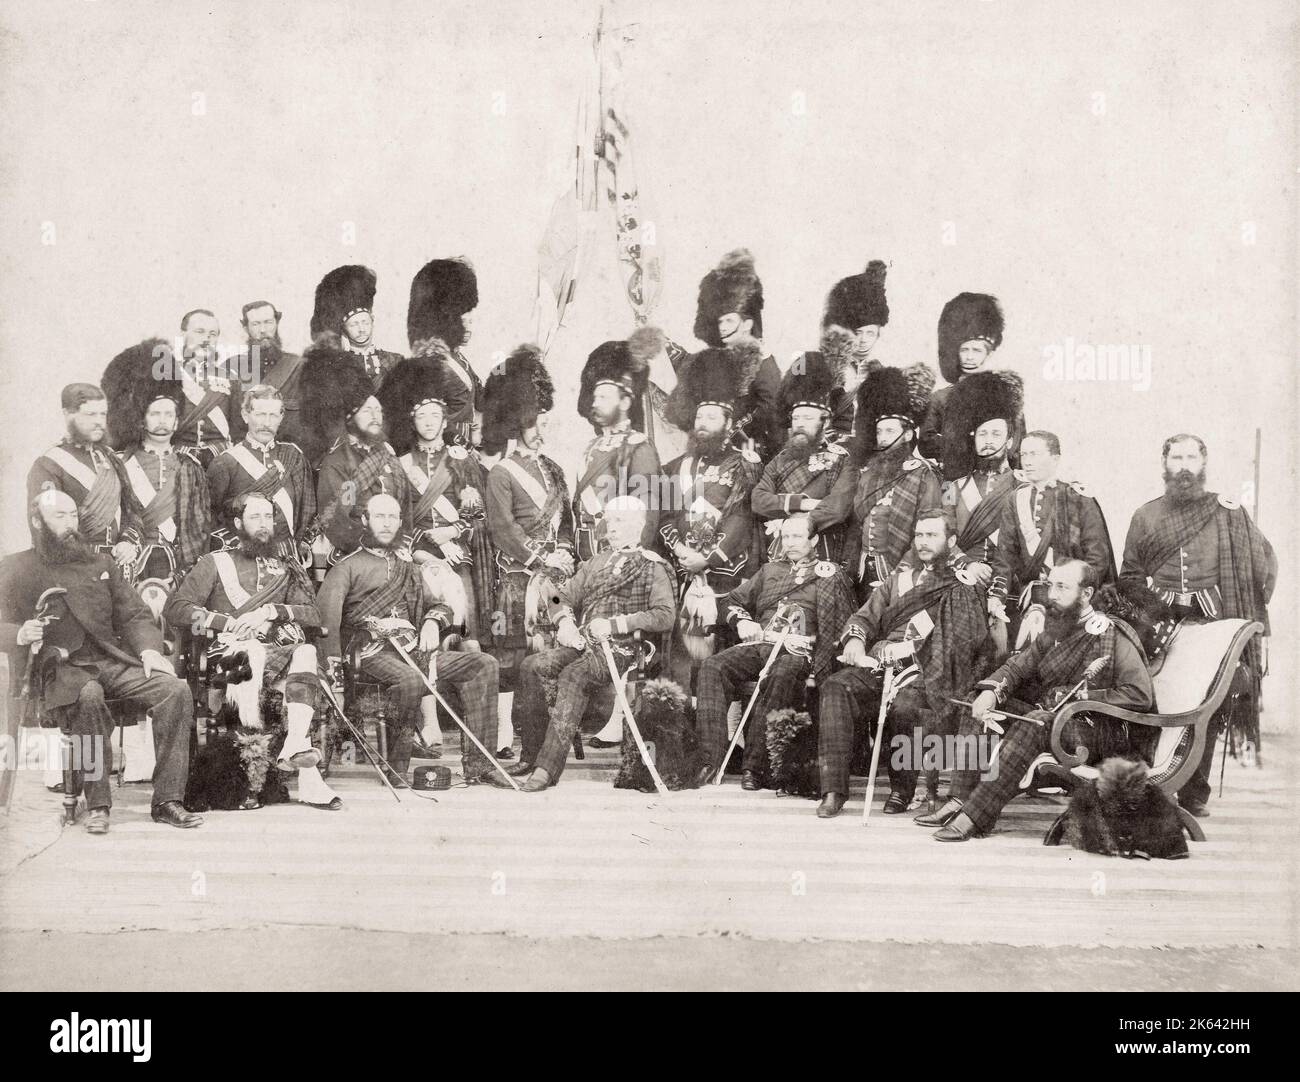 Vintage 19th century photograph - British army in India, 1860s - officers of the 42nd Highlanders Regiment Stock Photo